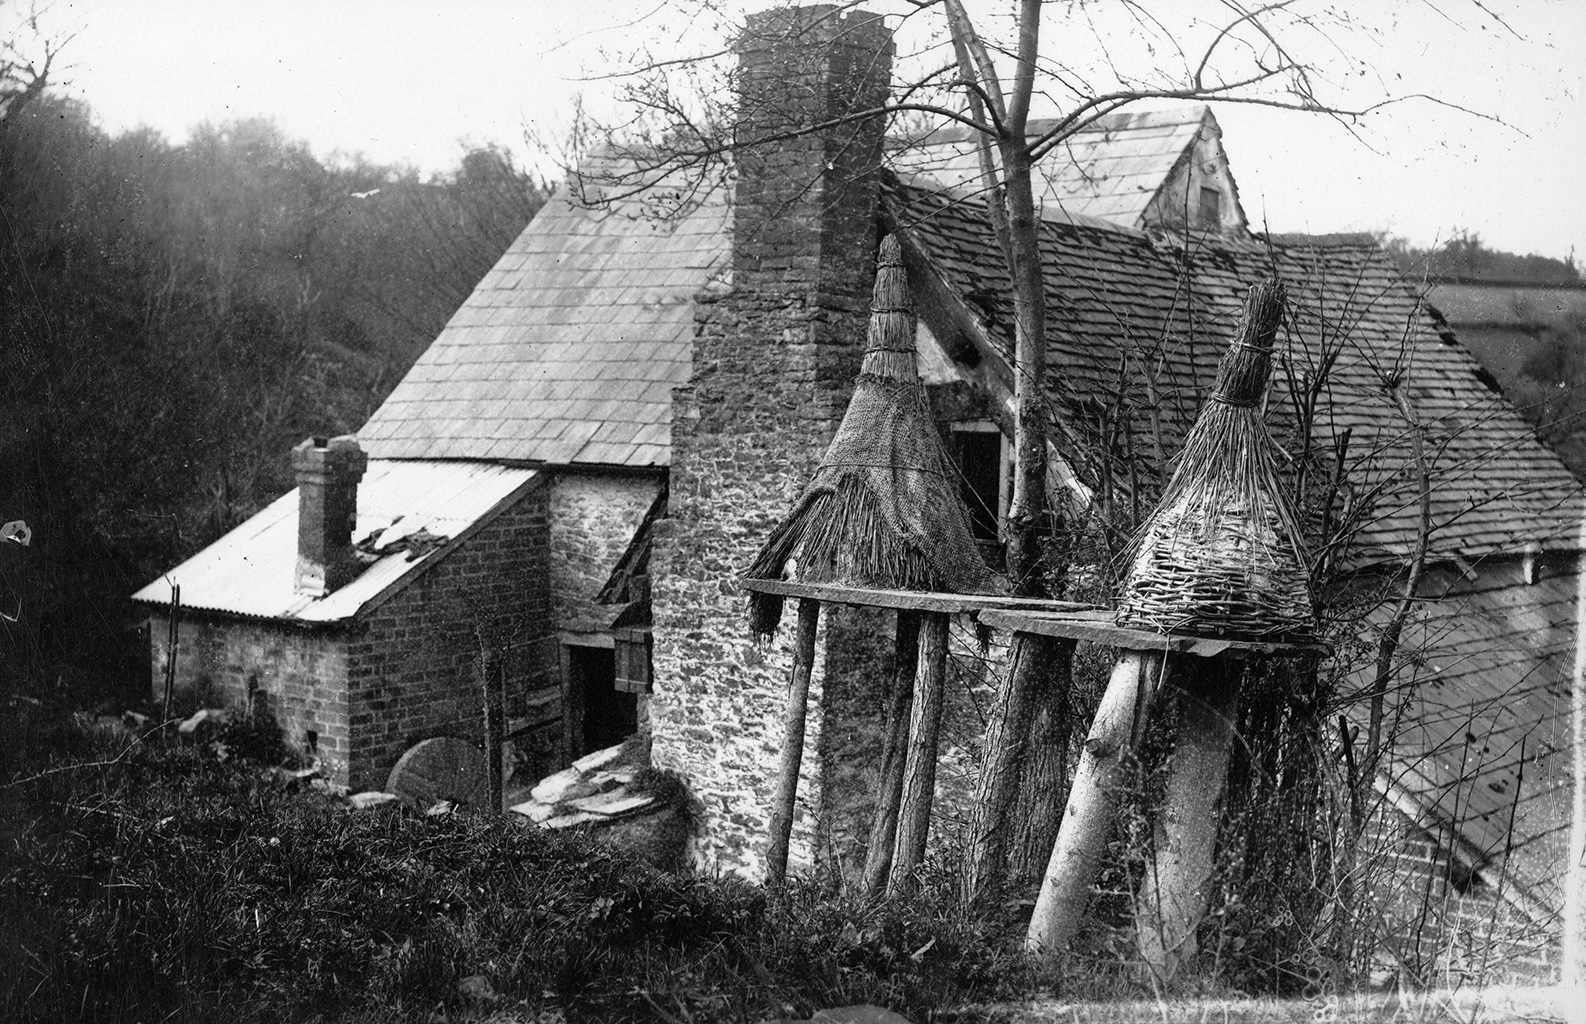 A black and white photograph of a house with a large, sloped roof and a tall brick chimney. There are also two straw beehives near it.